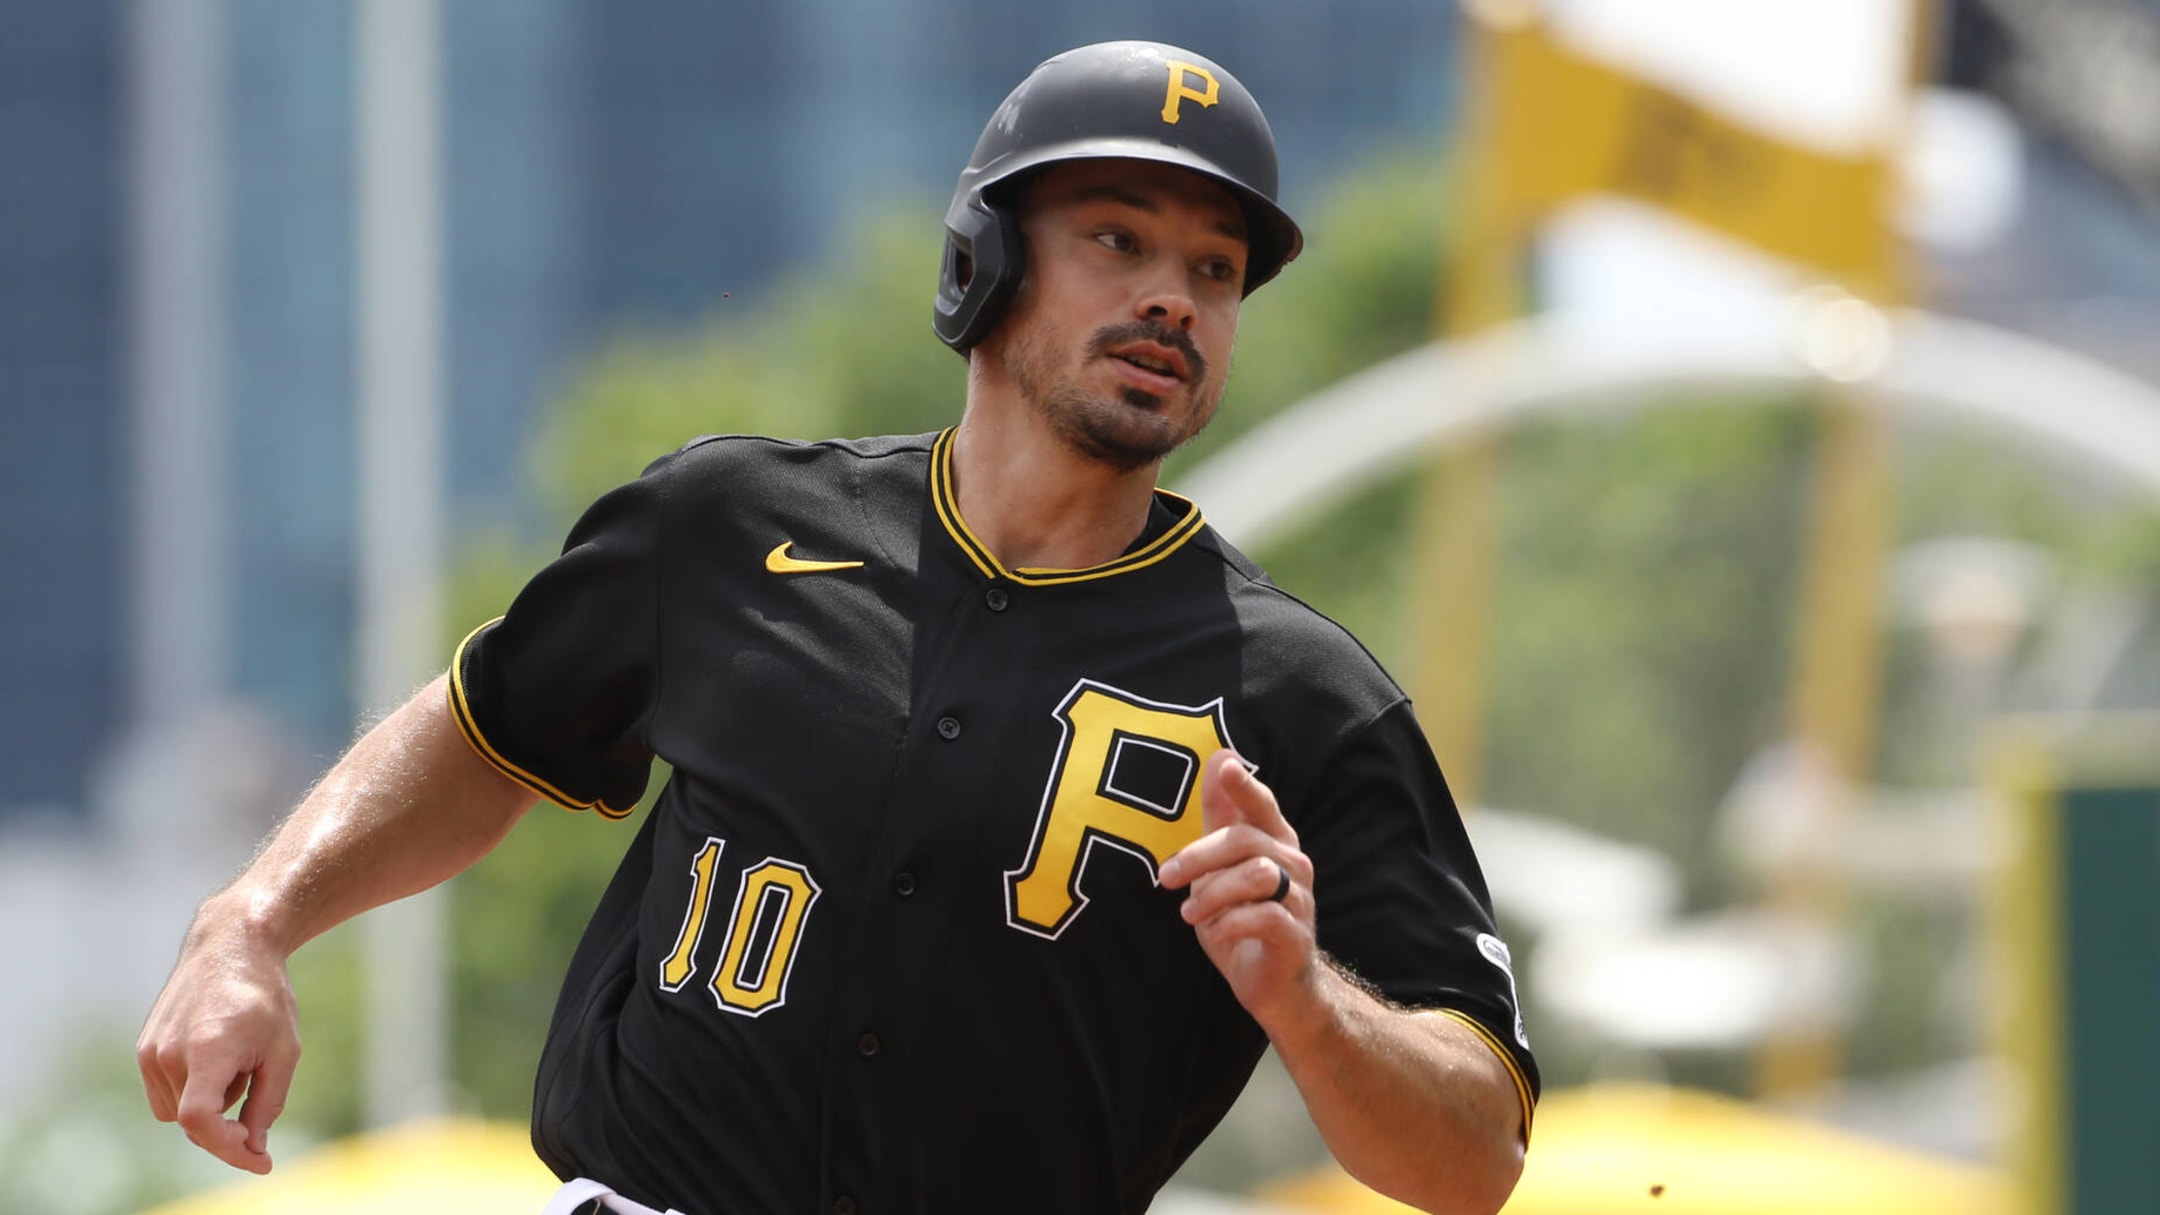 A hodgepodge on the Pirates in August